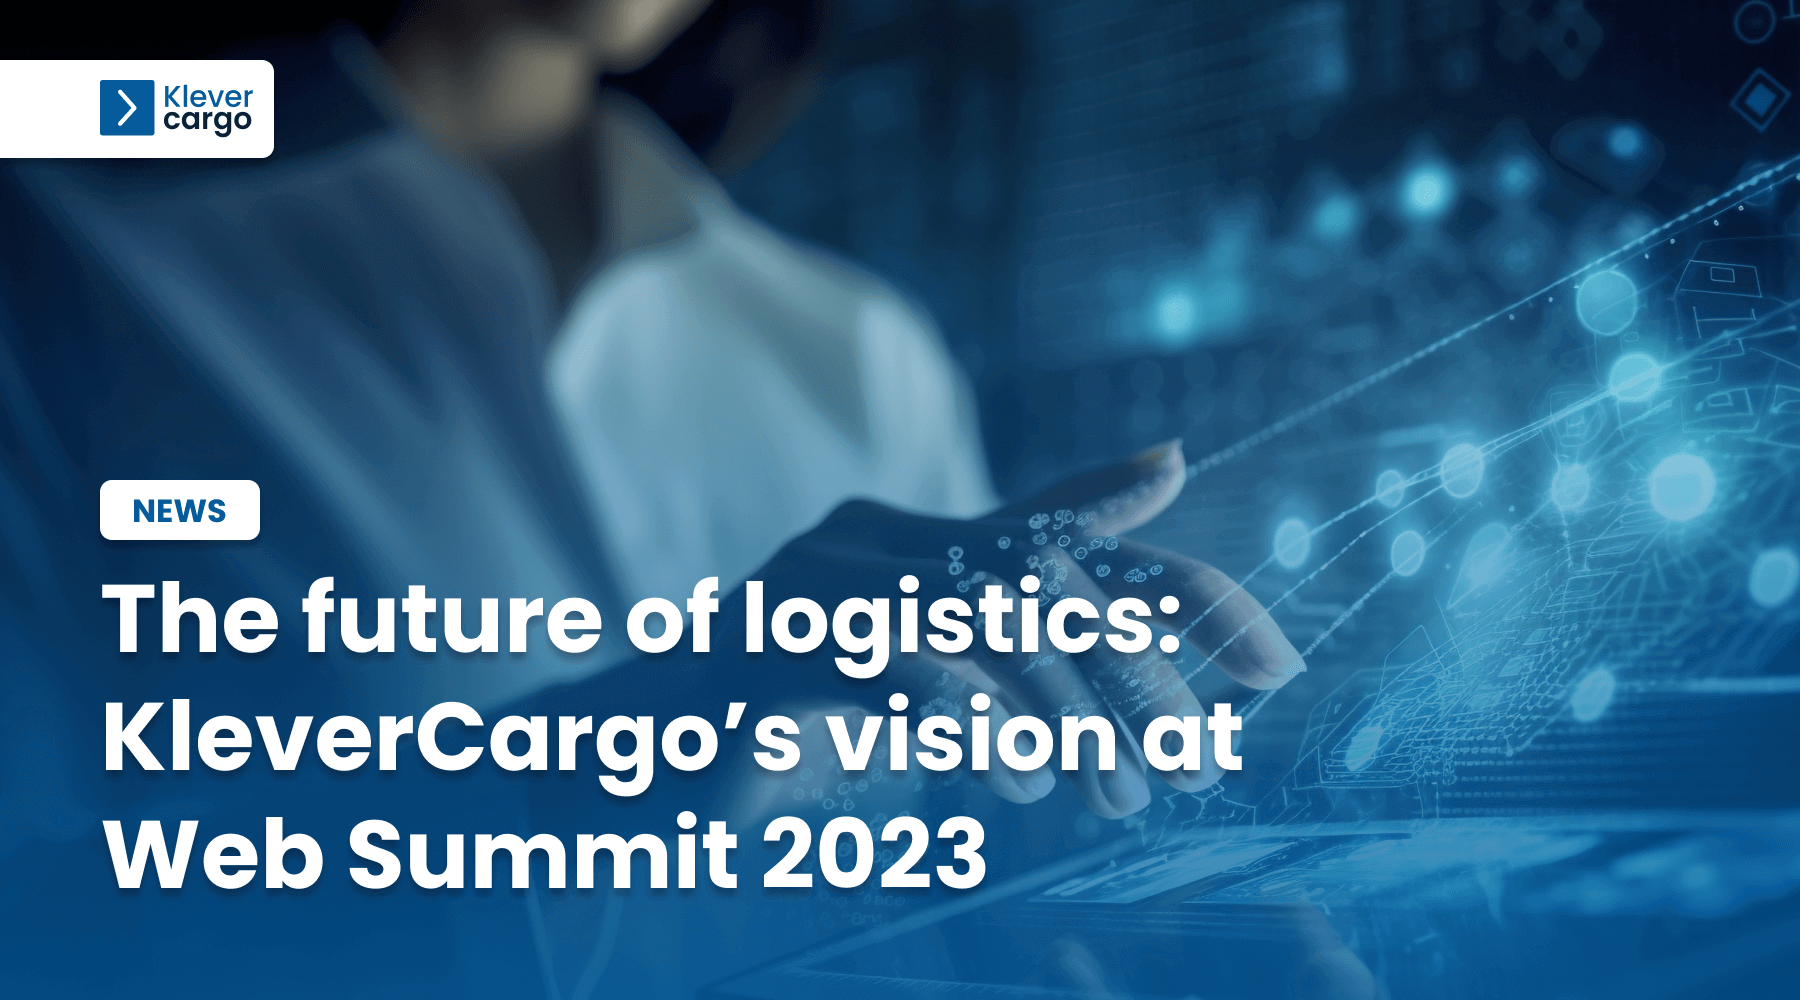 The future of logistics: KleverCargo’s vision at Web Summit 2023